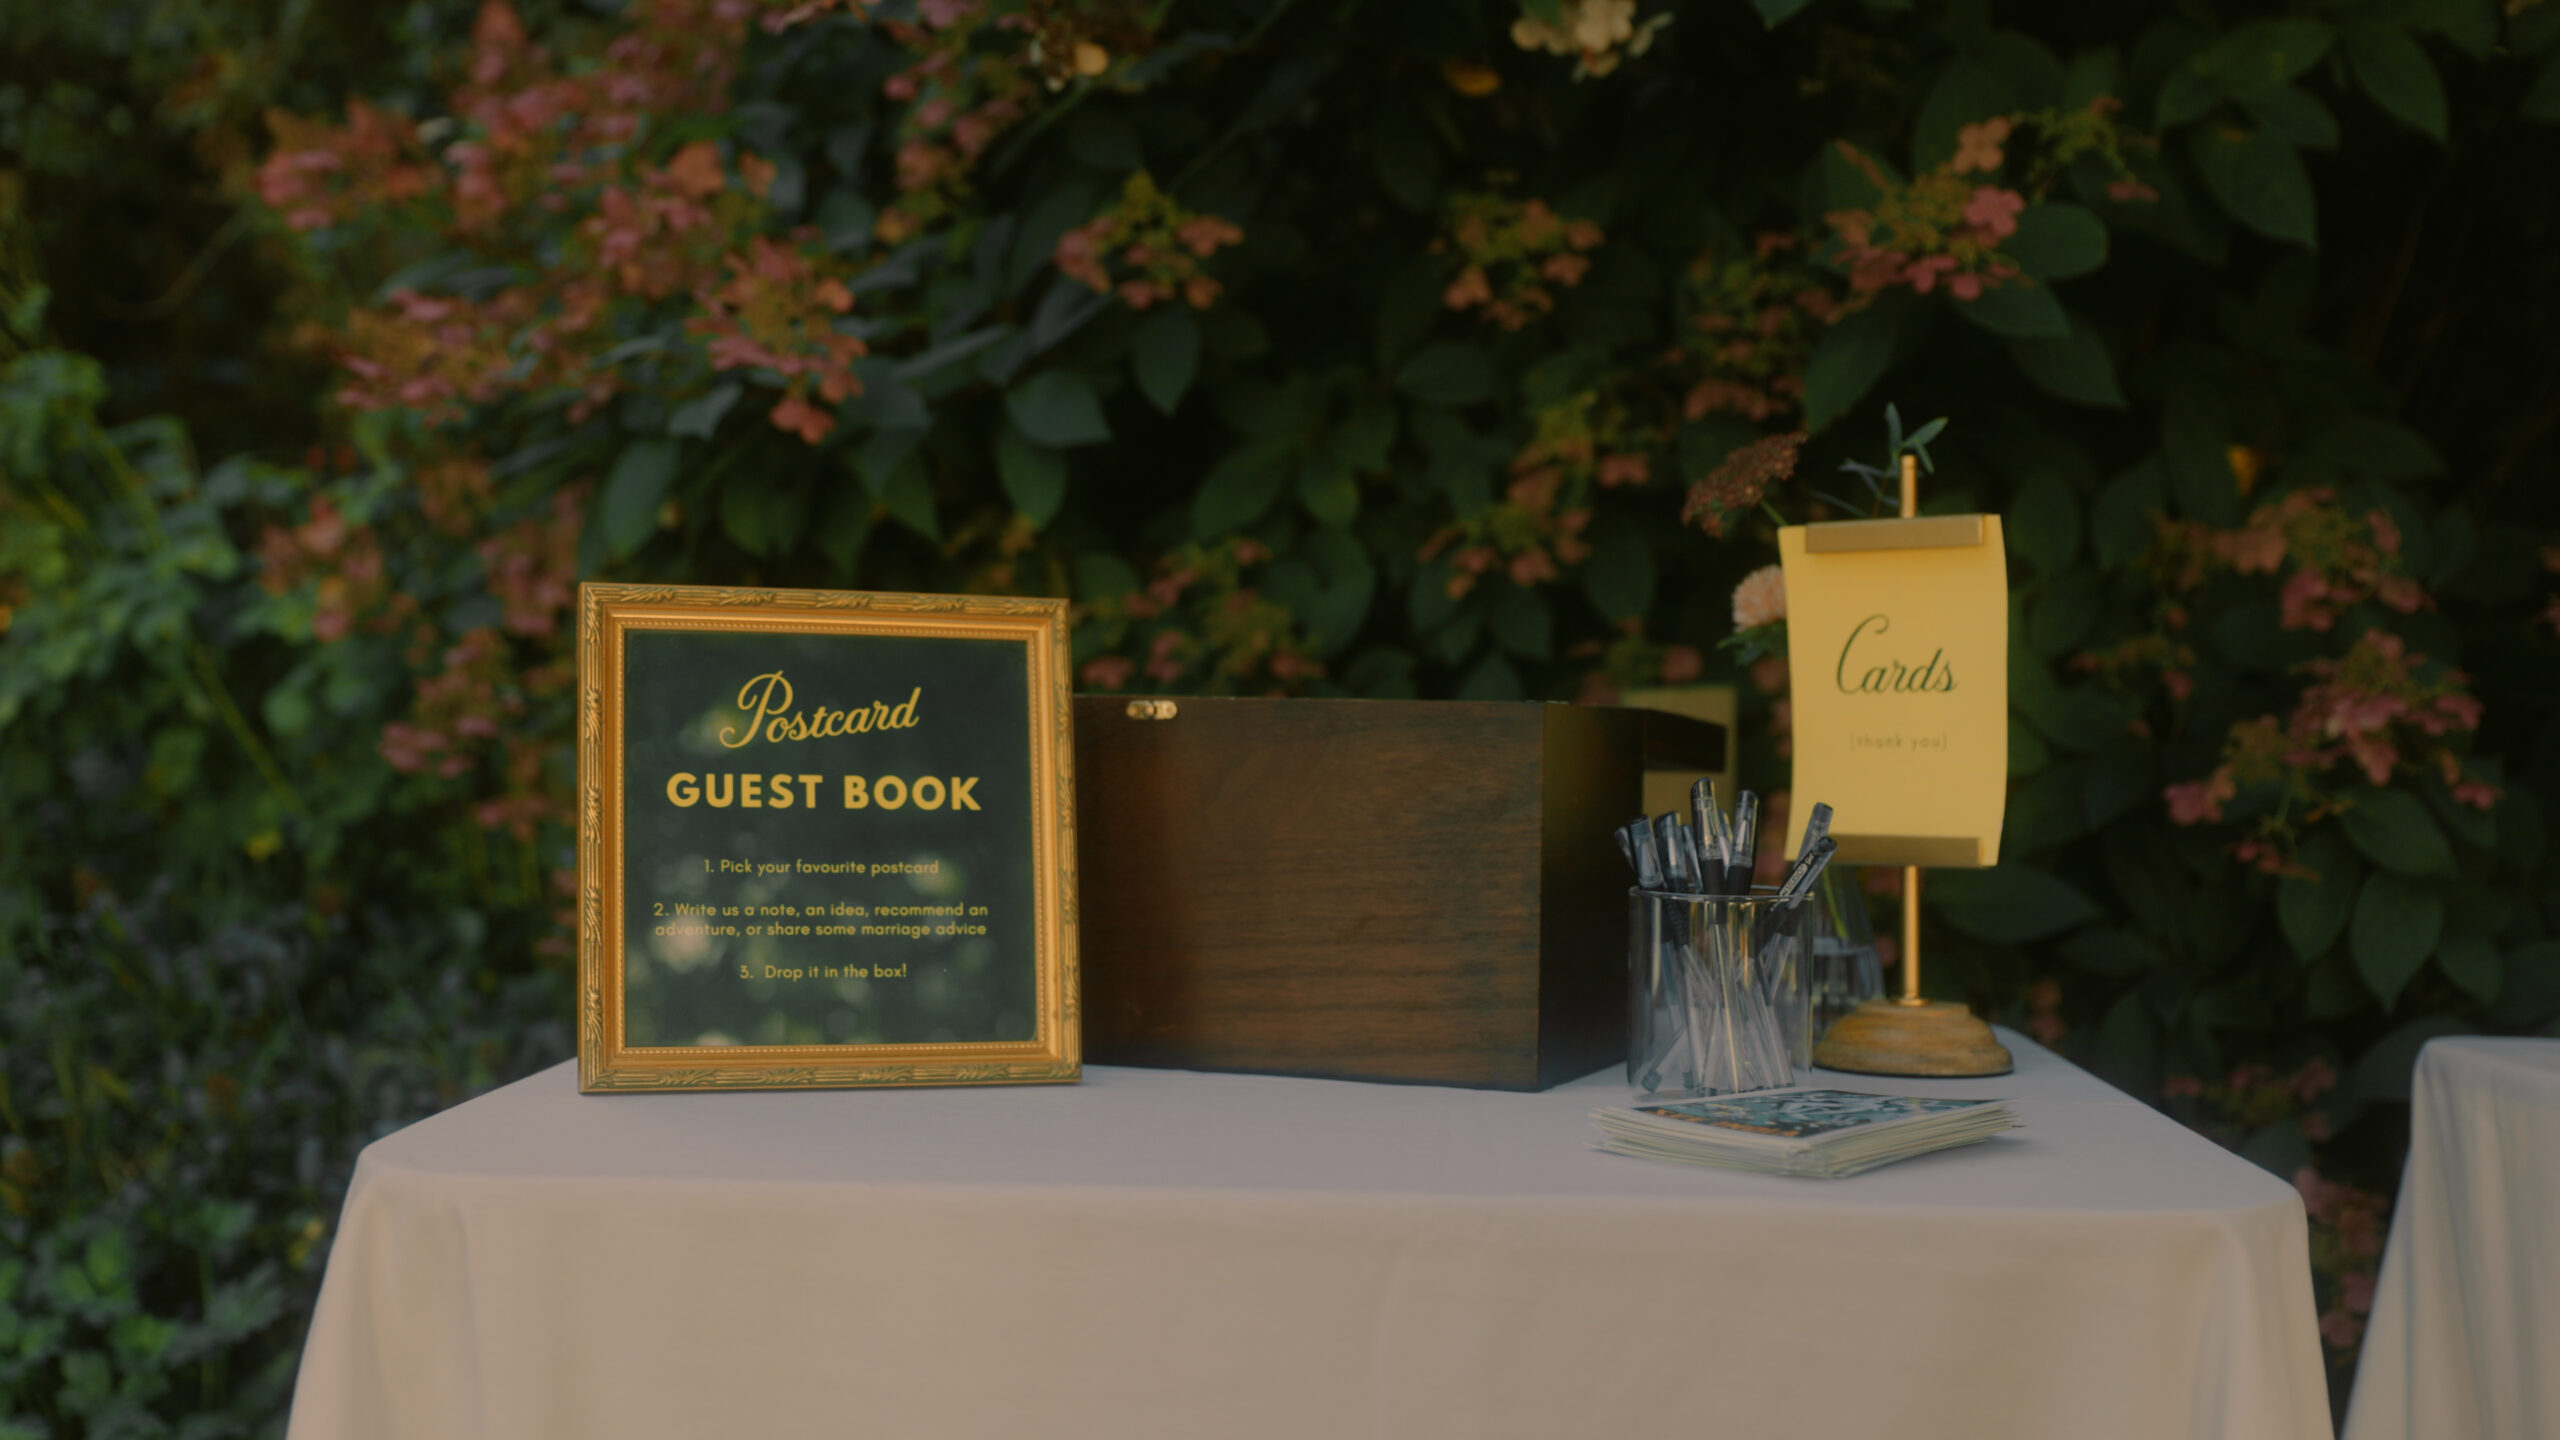 Wes Anderson inspired wedding table guest book and cards signage.